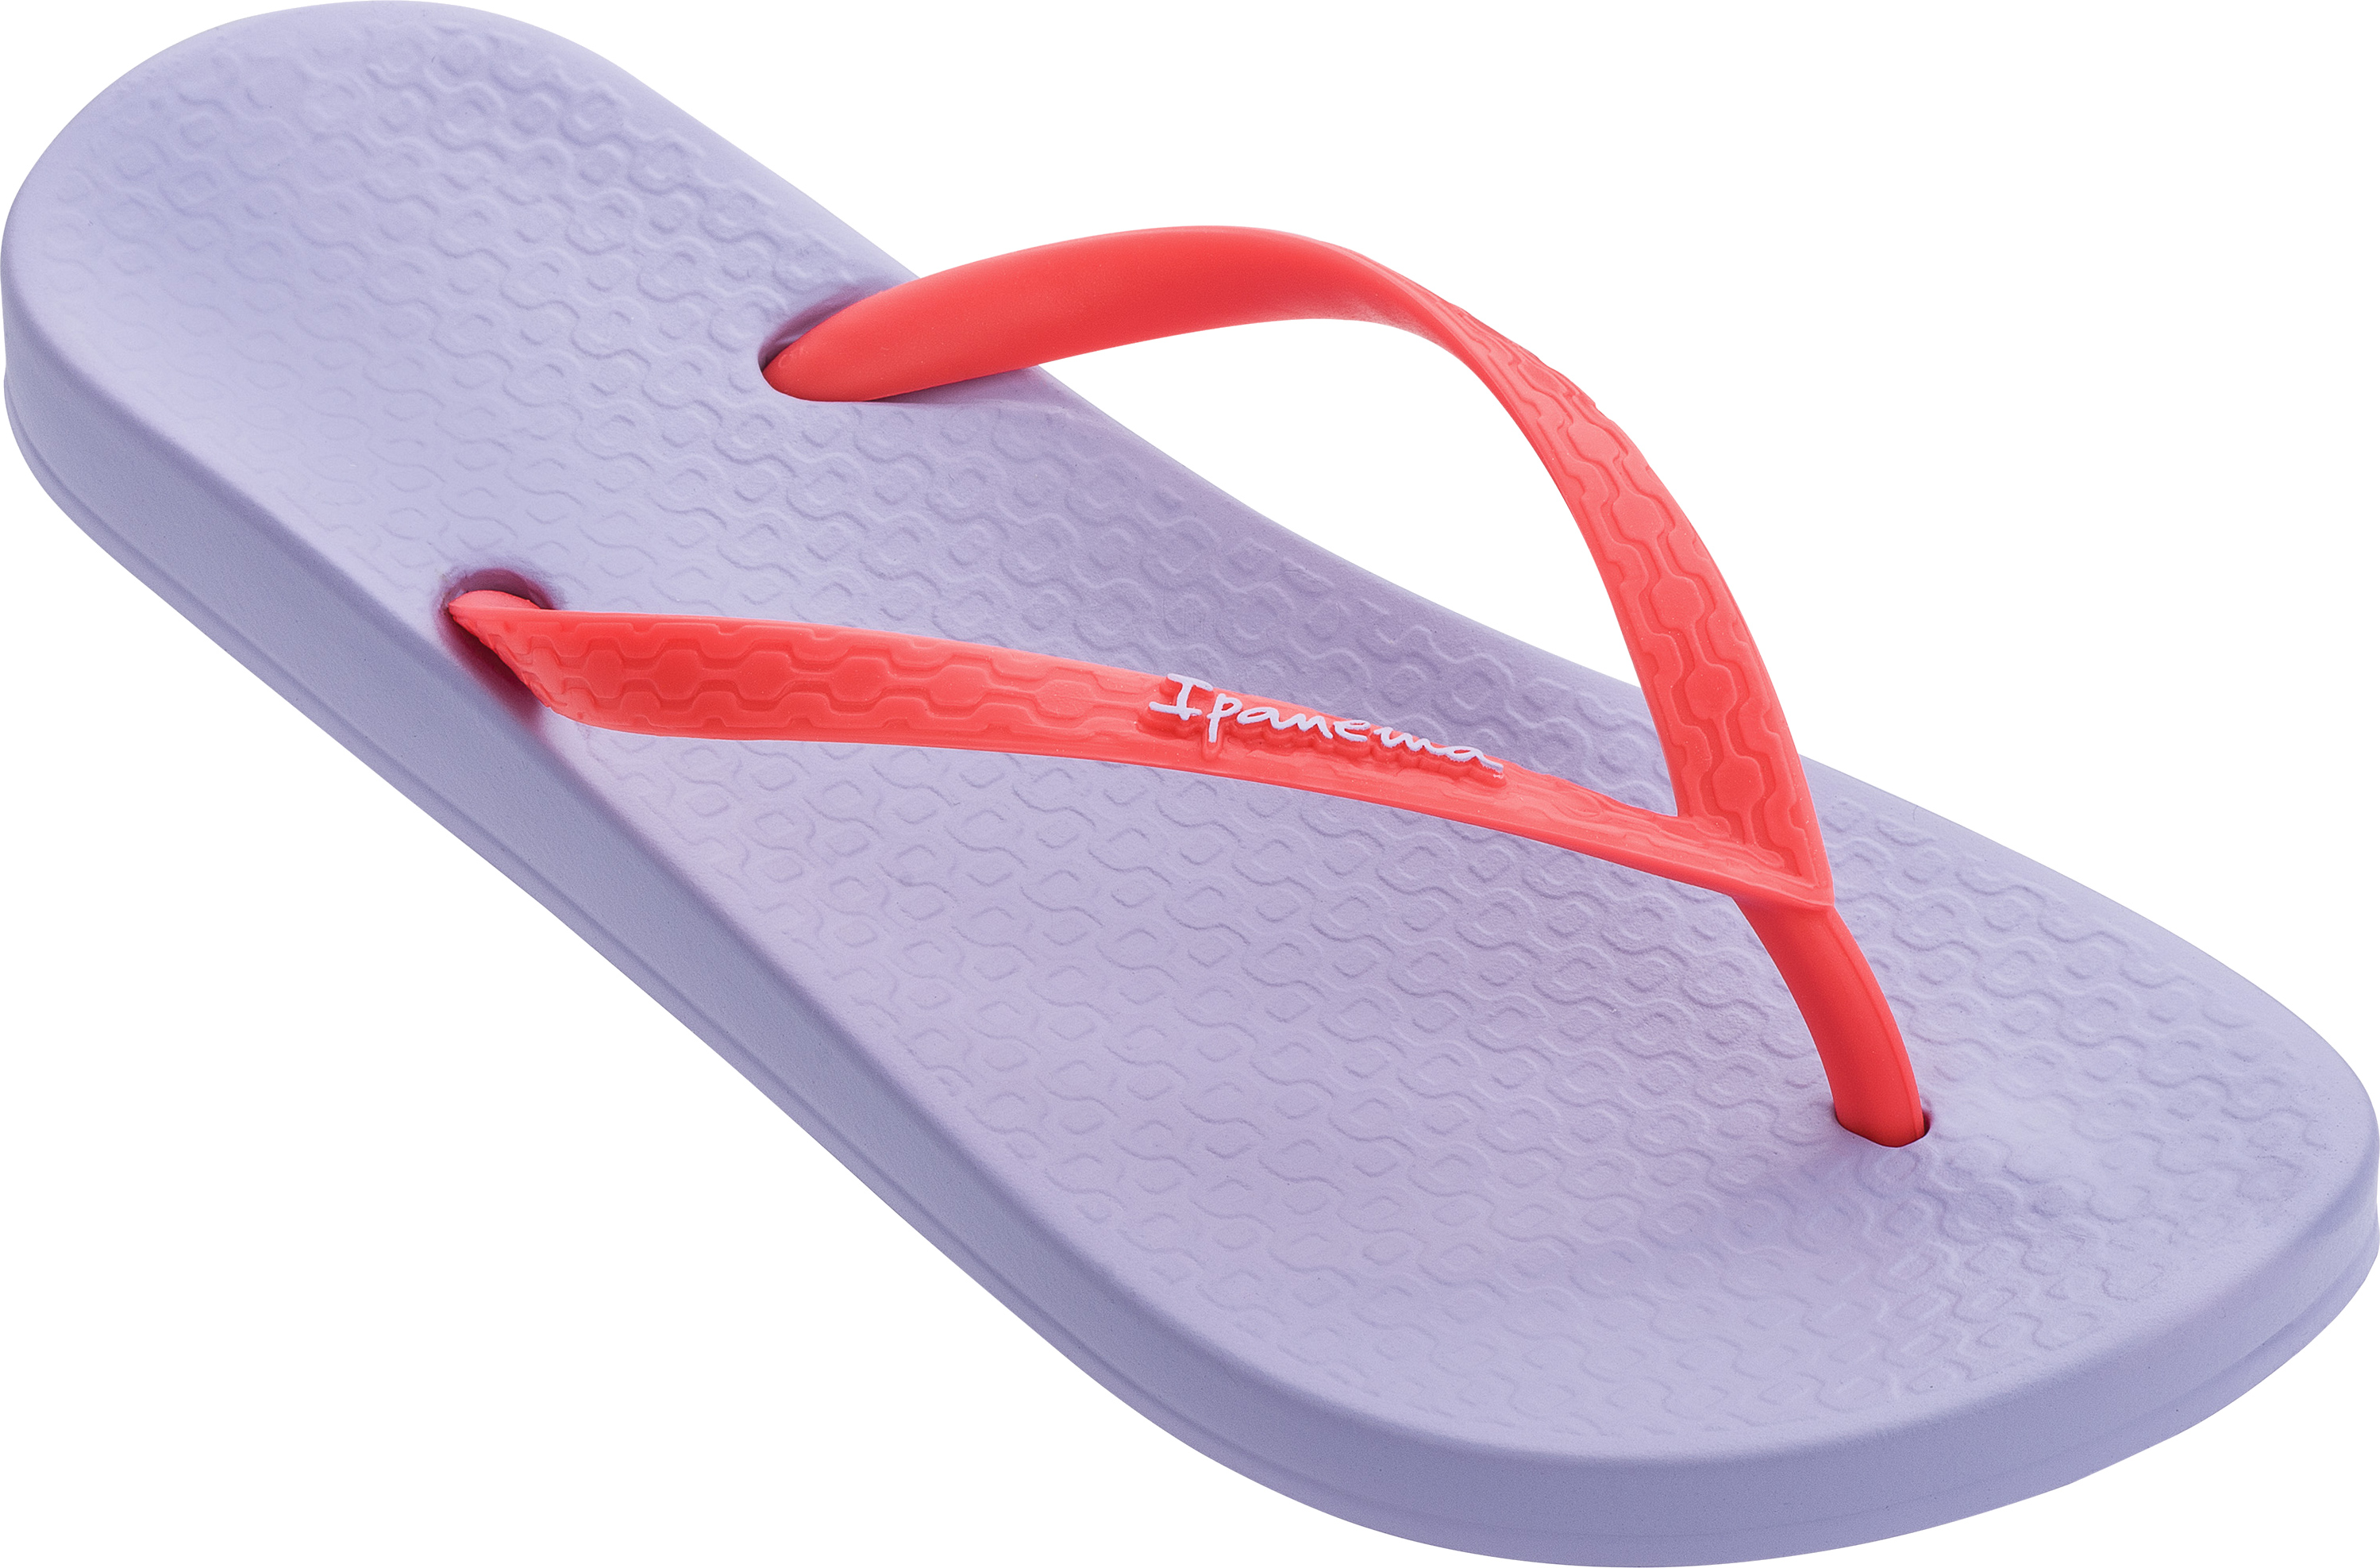 Ipanema Coral/Violet Tropical size 6